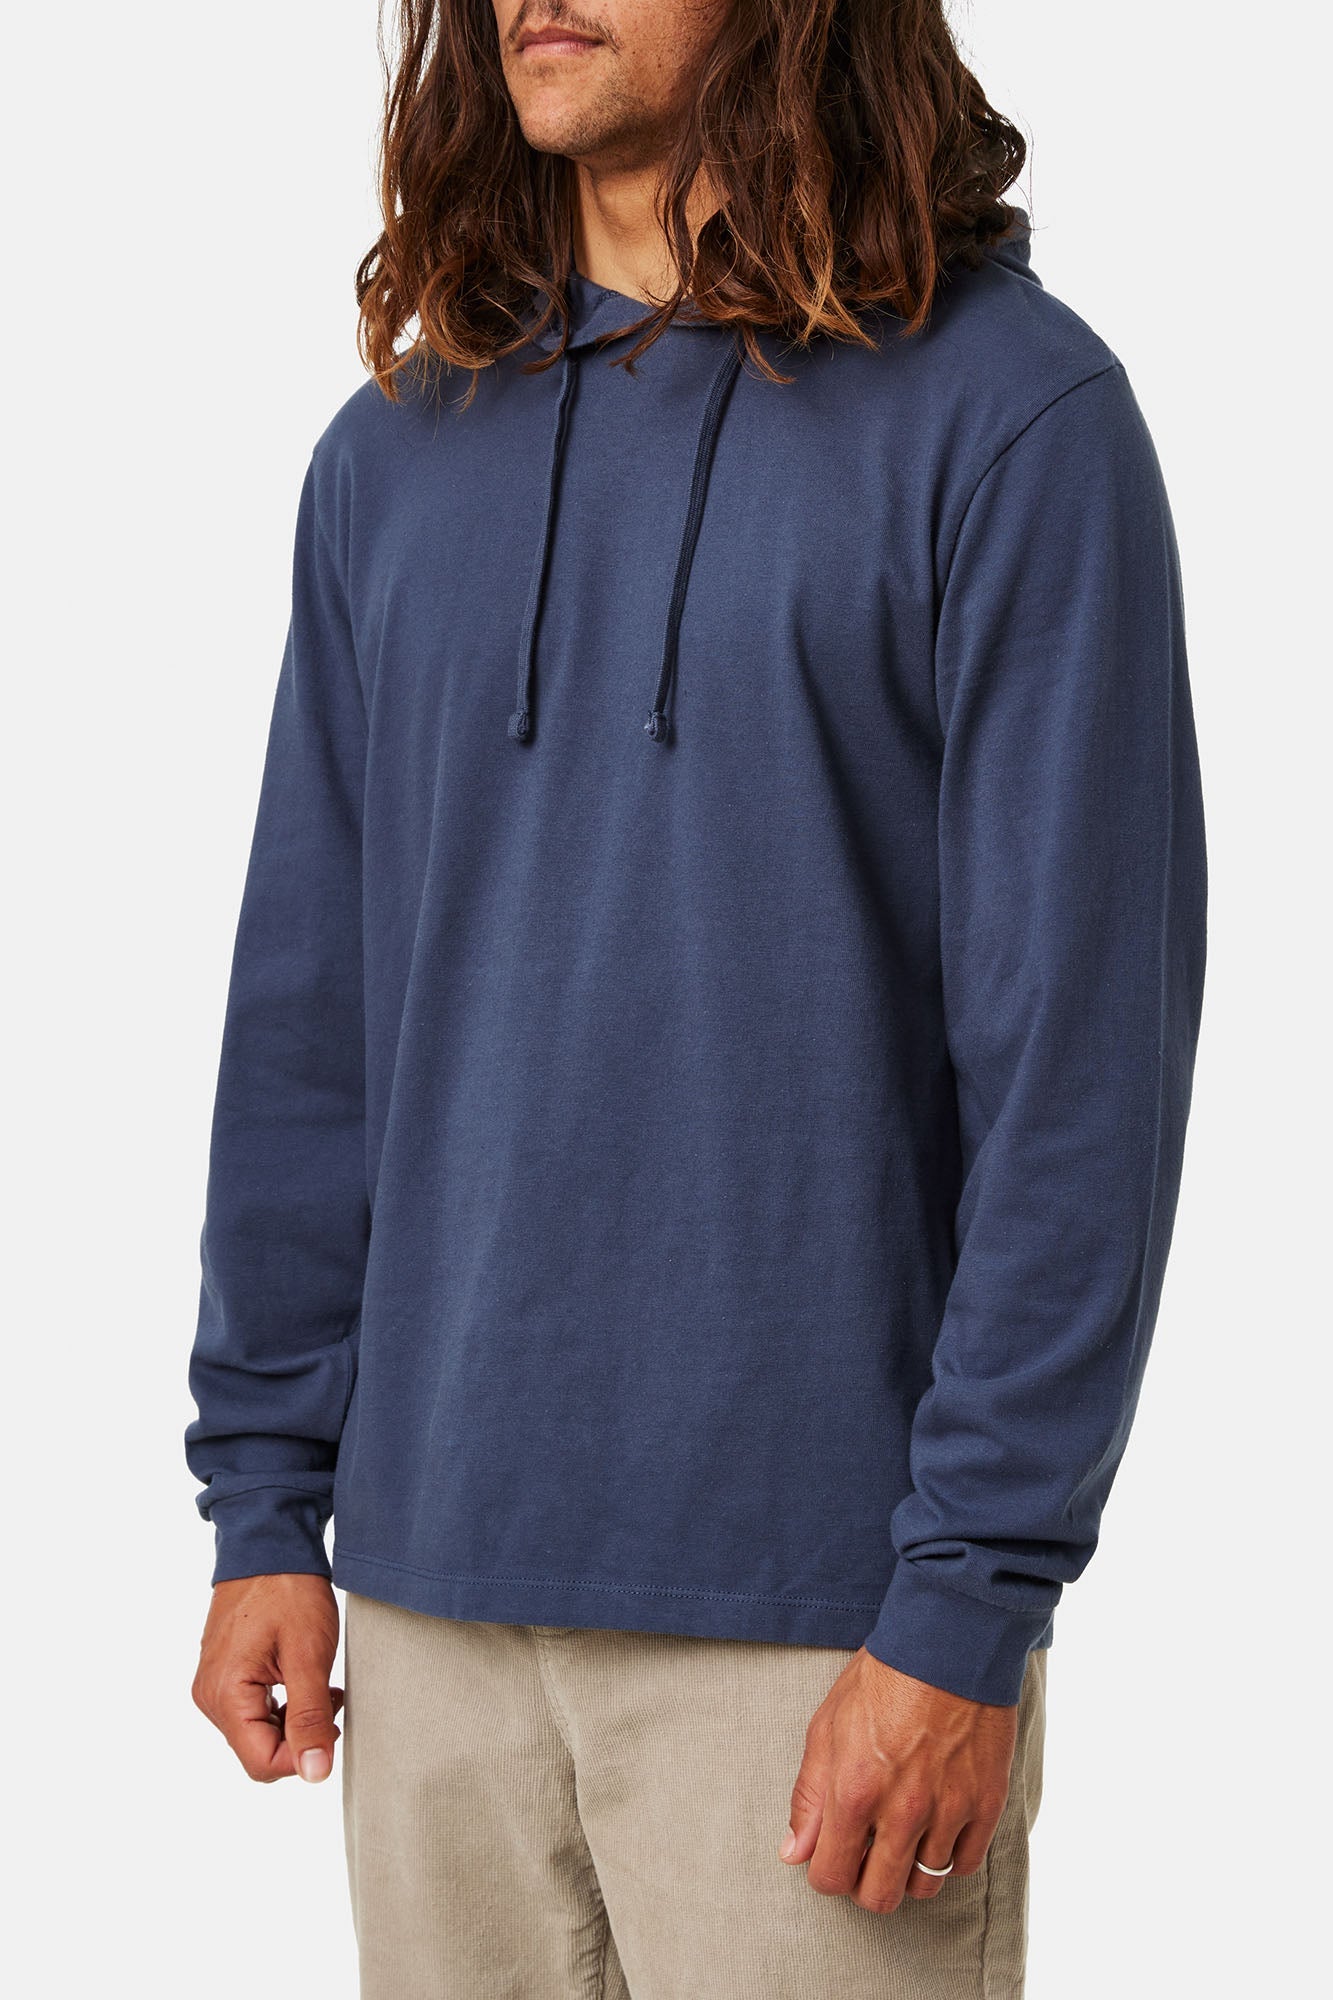 Katin M LS Hide Pullover BALTIC BLUE